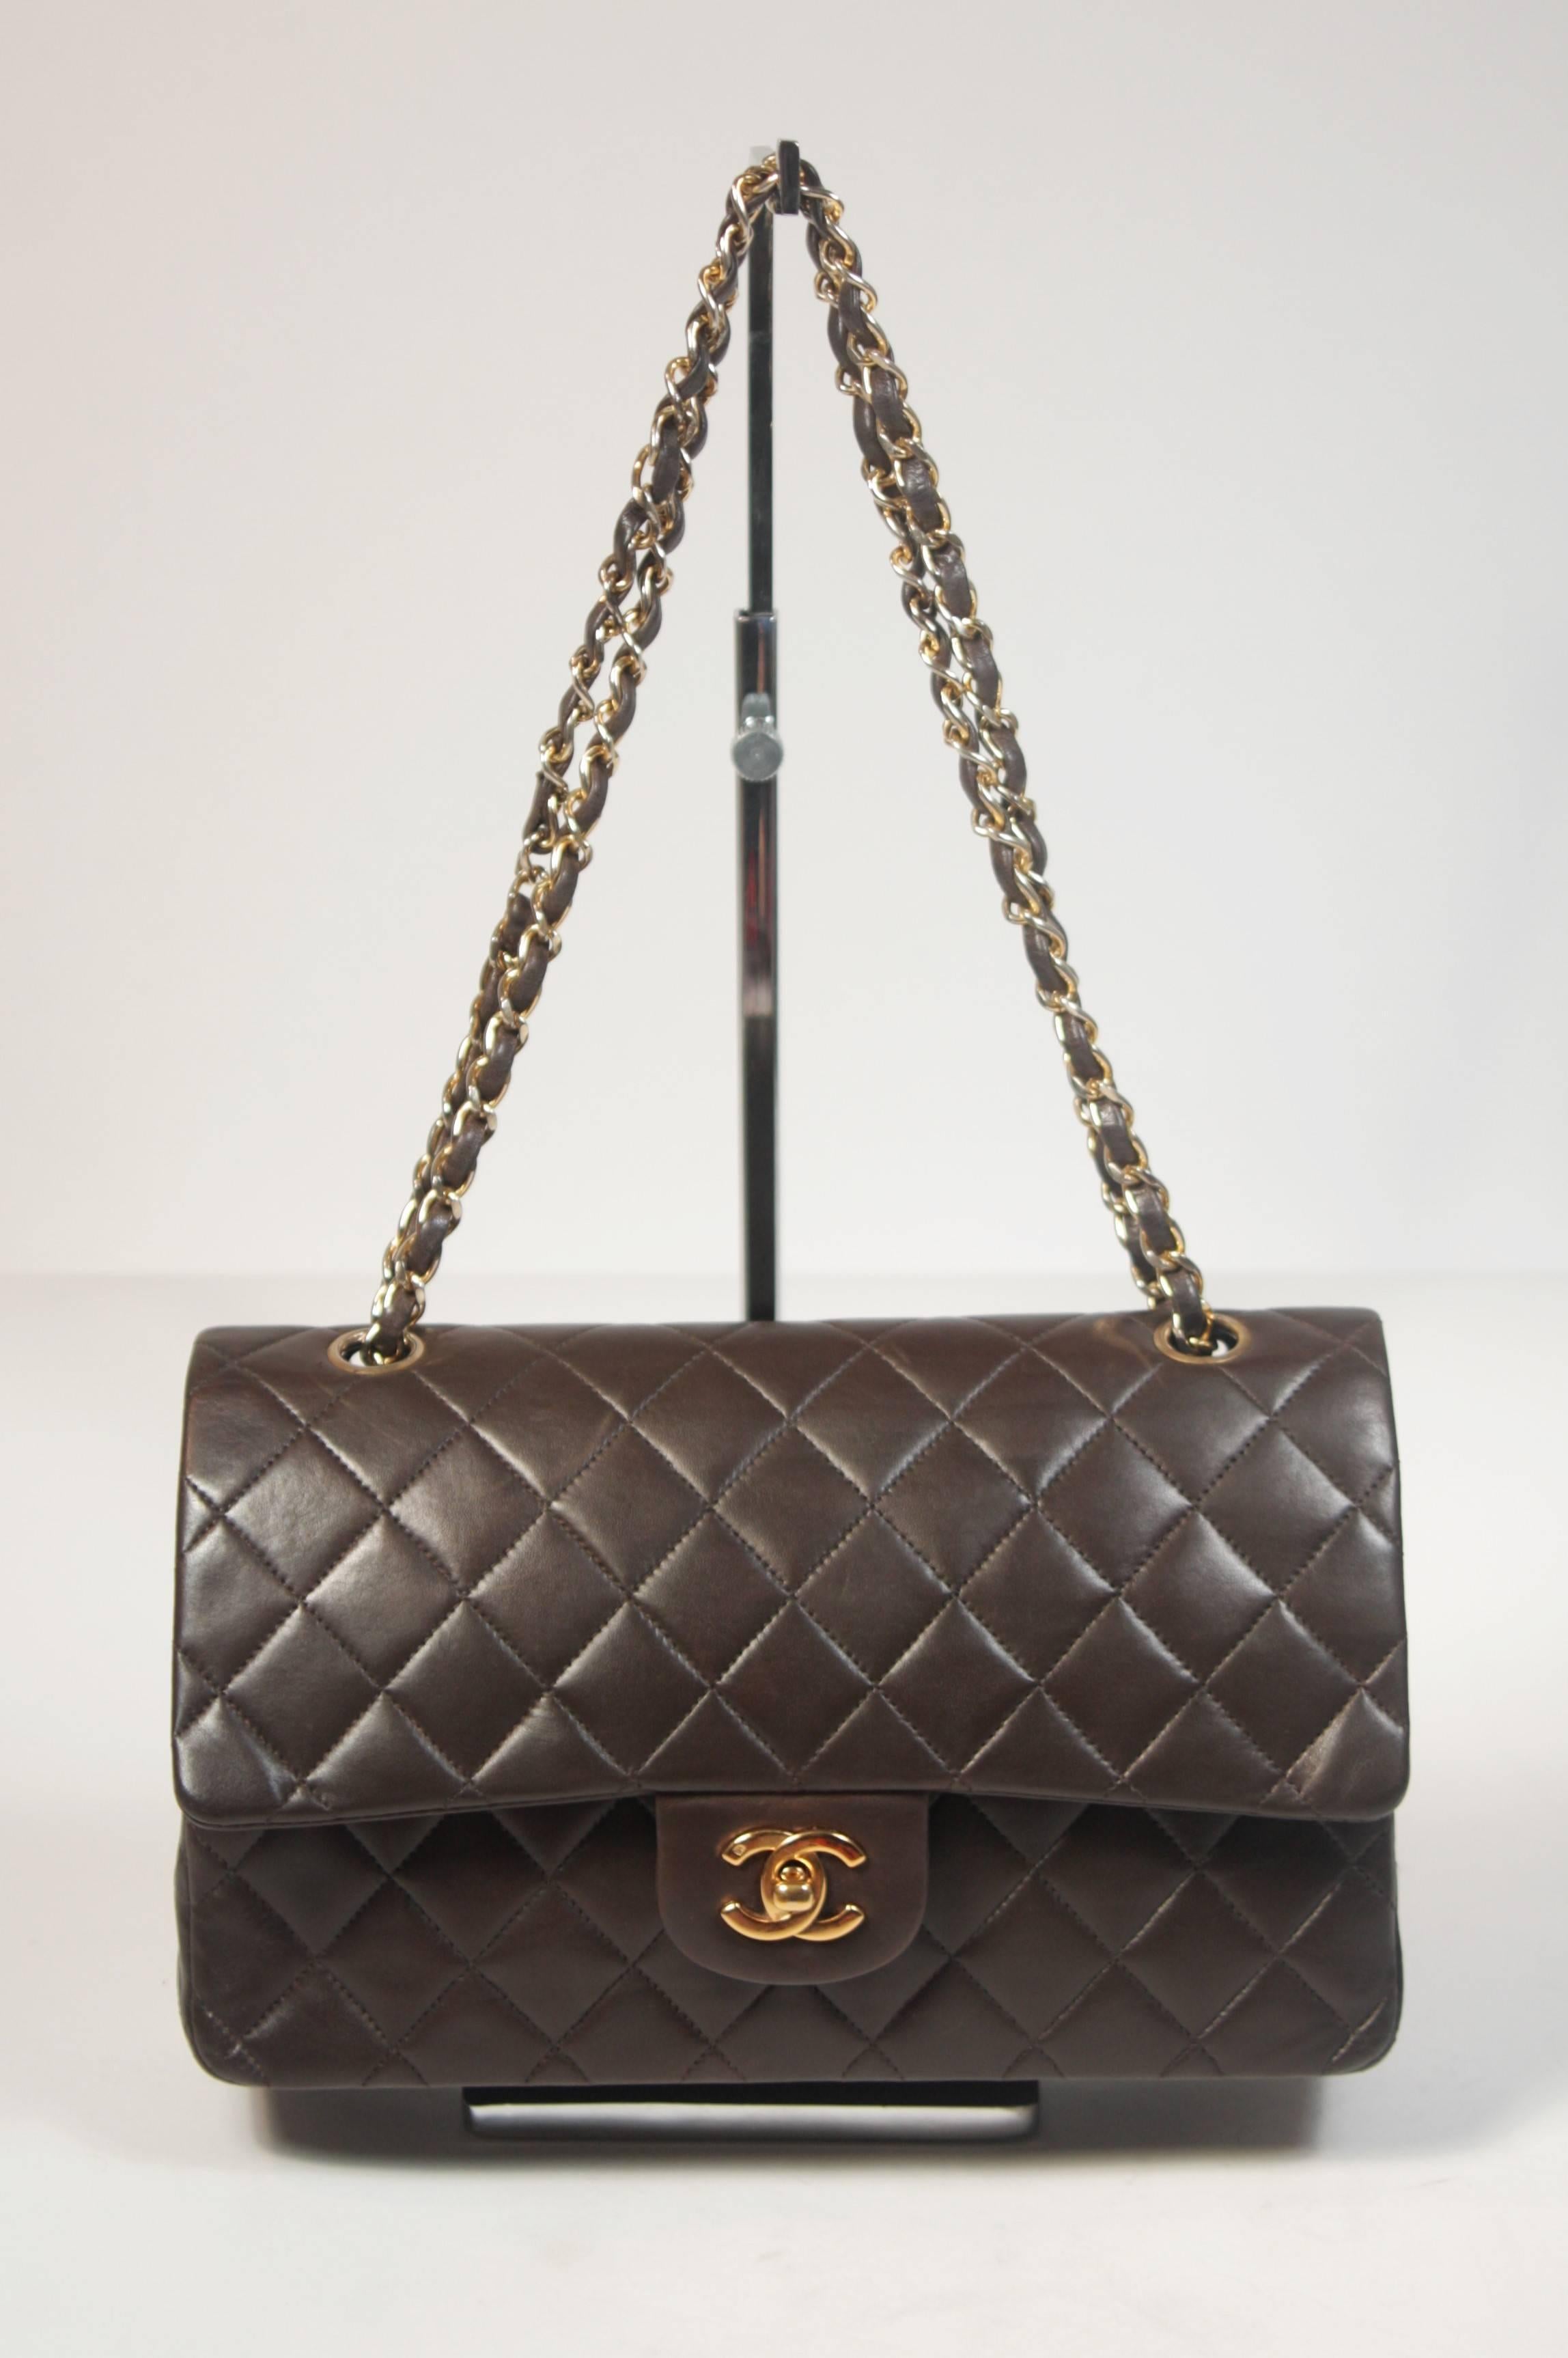 This Chanel design is available for viewing at our Beverly Hills Boutique. We offer a large selection of evening gowns and luxury garments. 

 This handbag is composed of a chocolate quilted lambskin leather with Chanel's signature diamond